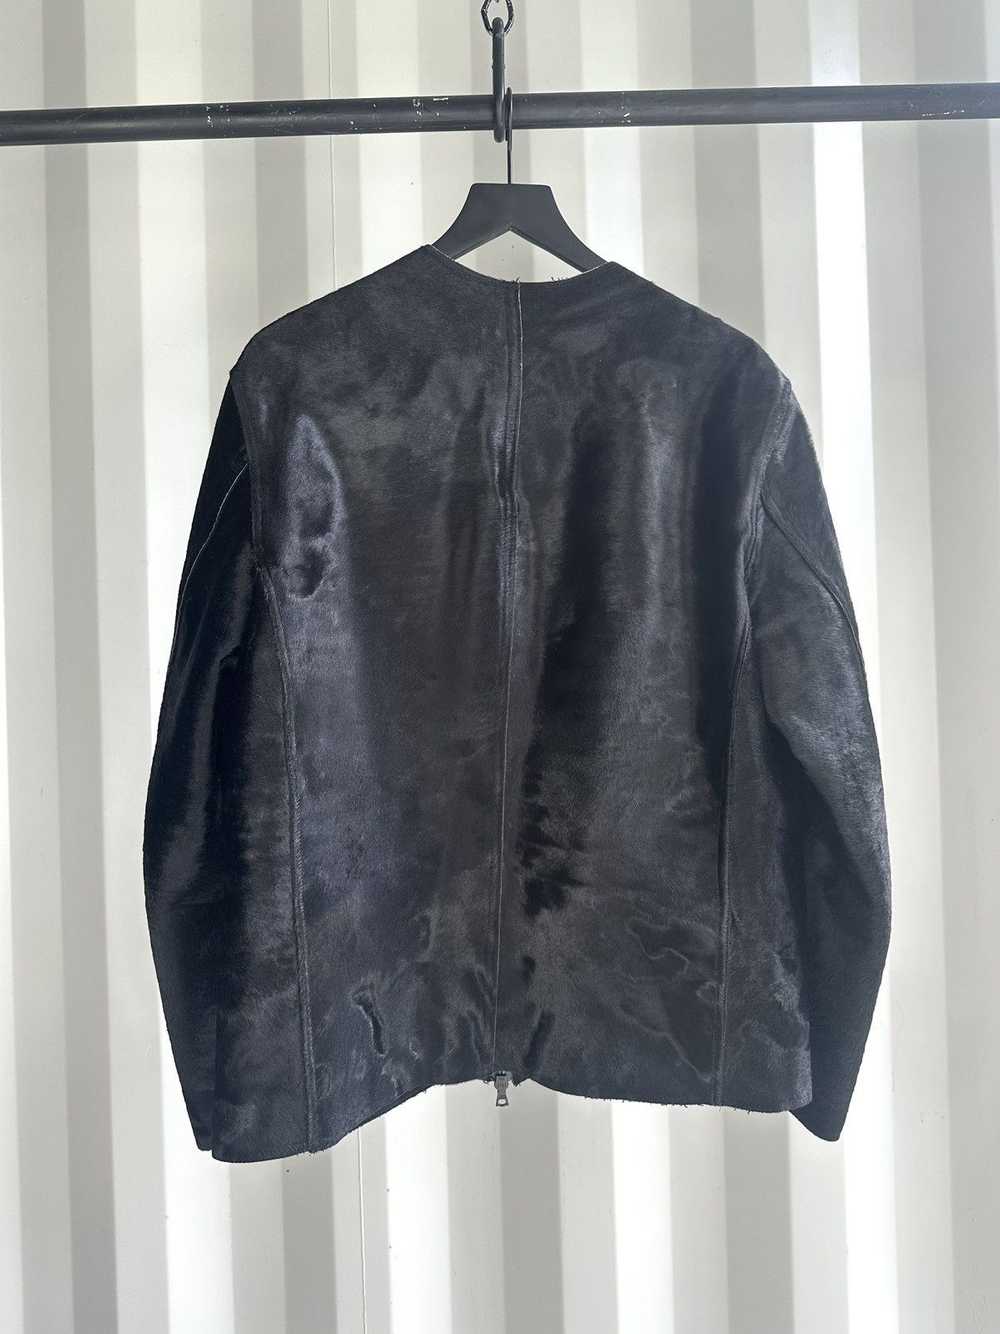 Gucci × Tom Ford Pony Hair Jacket - image 5